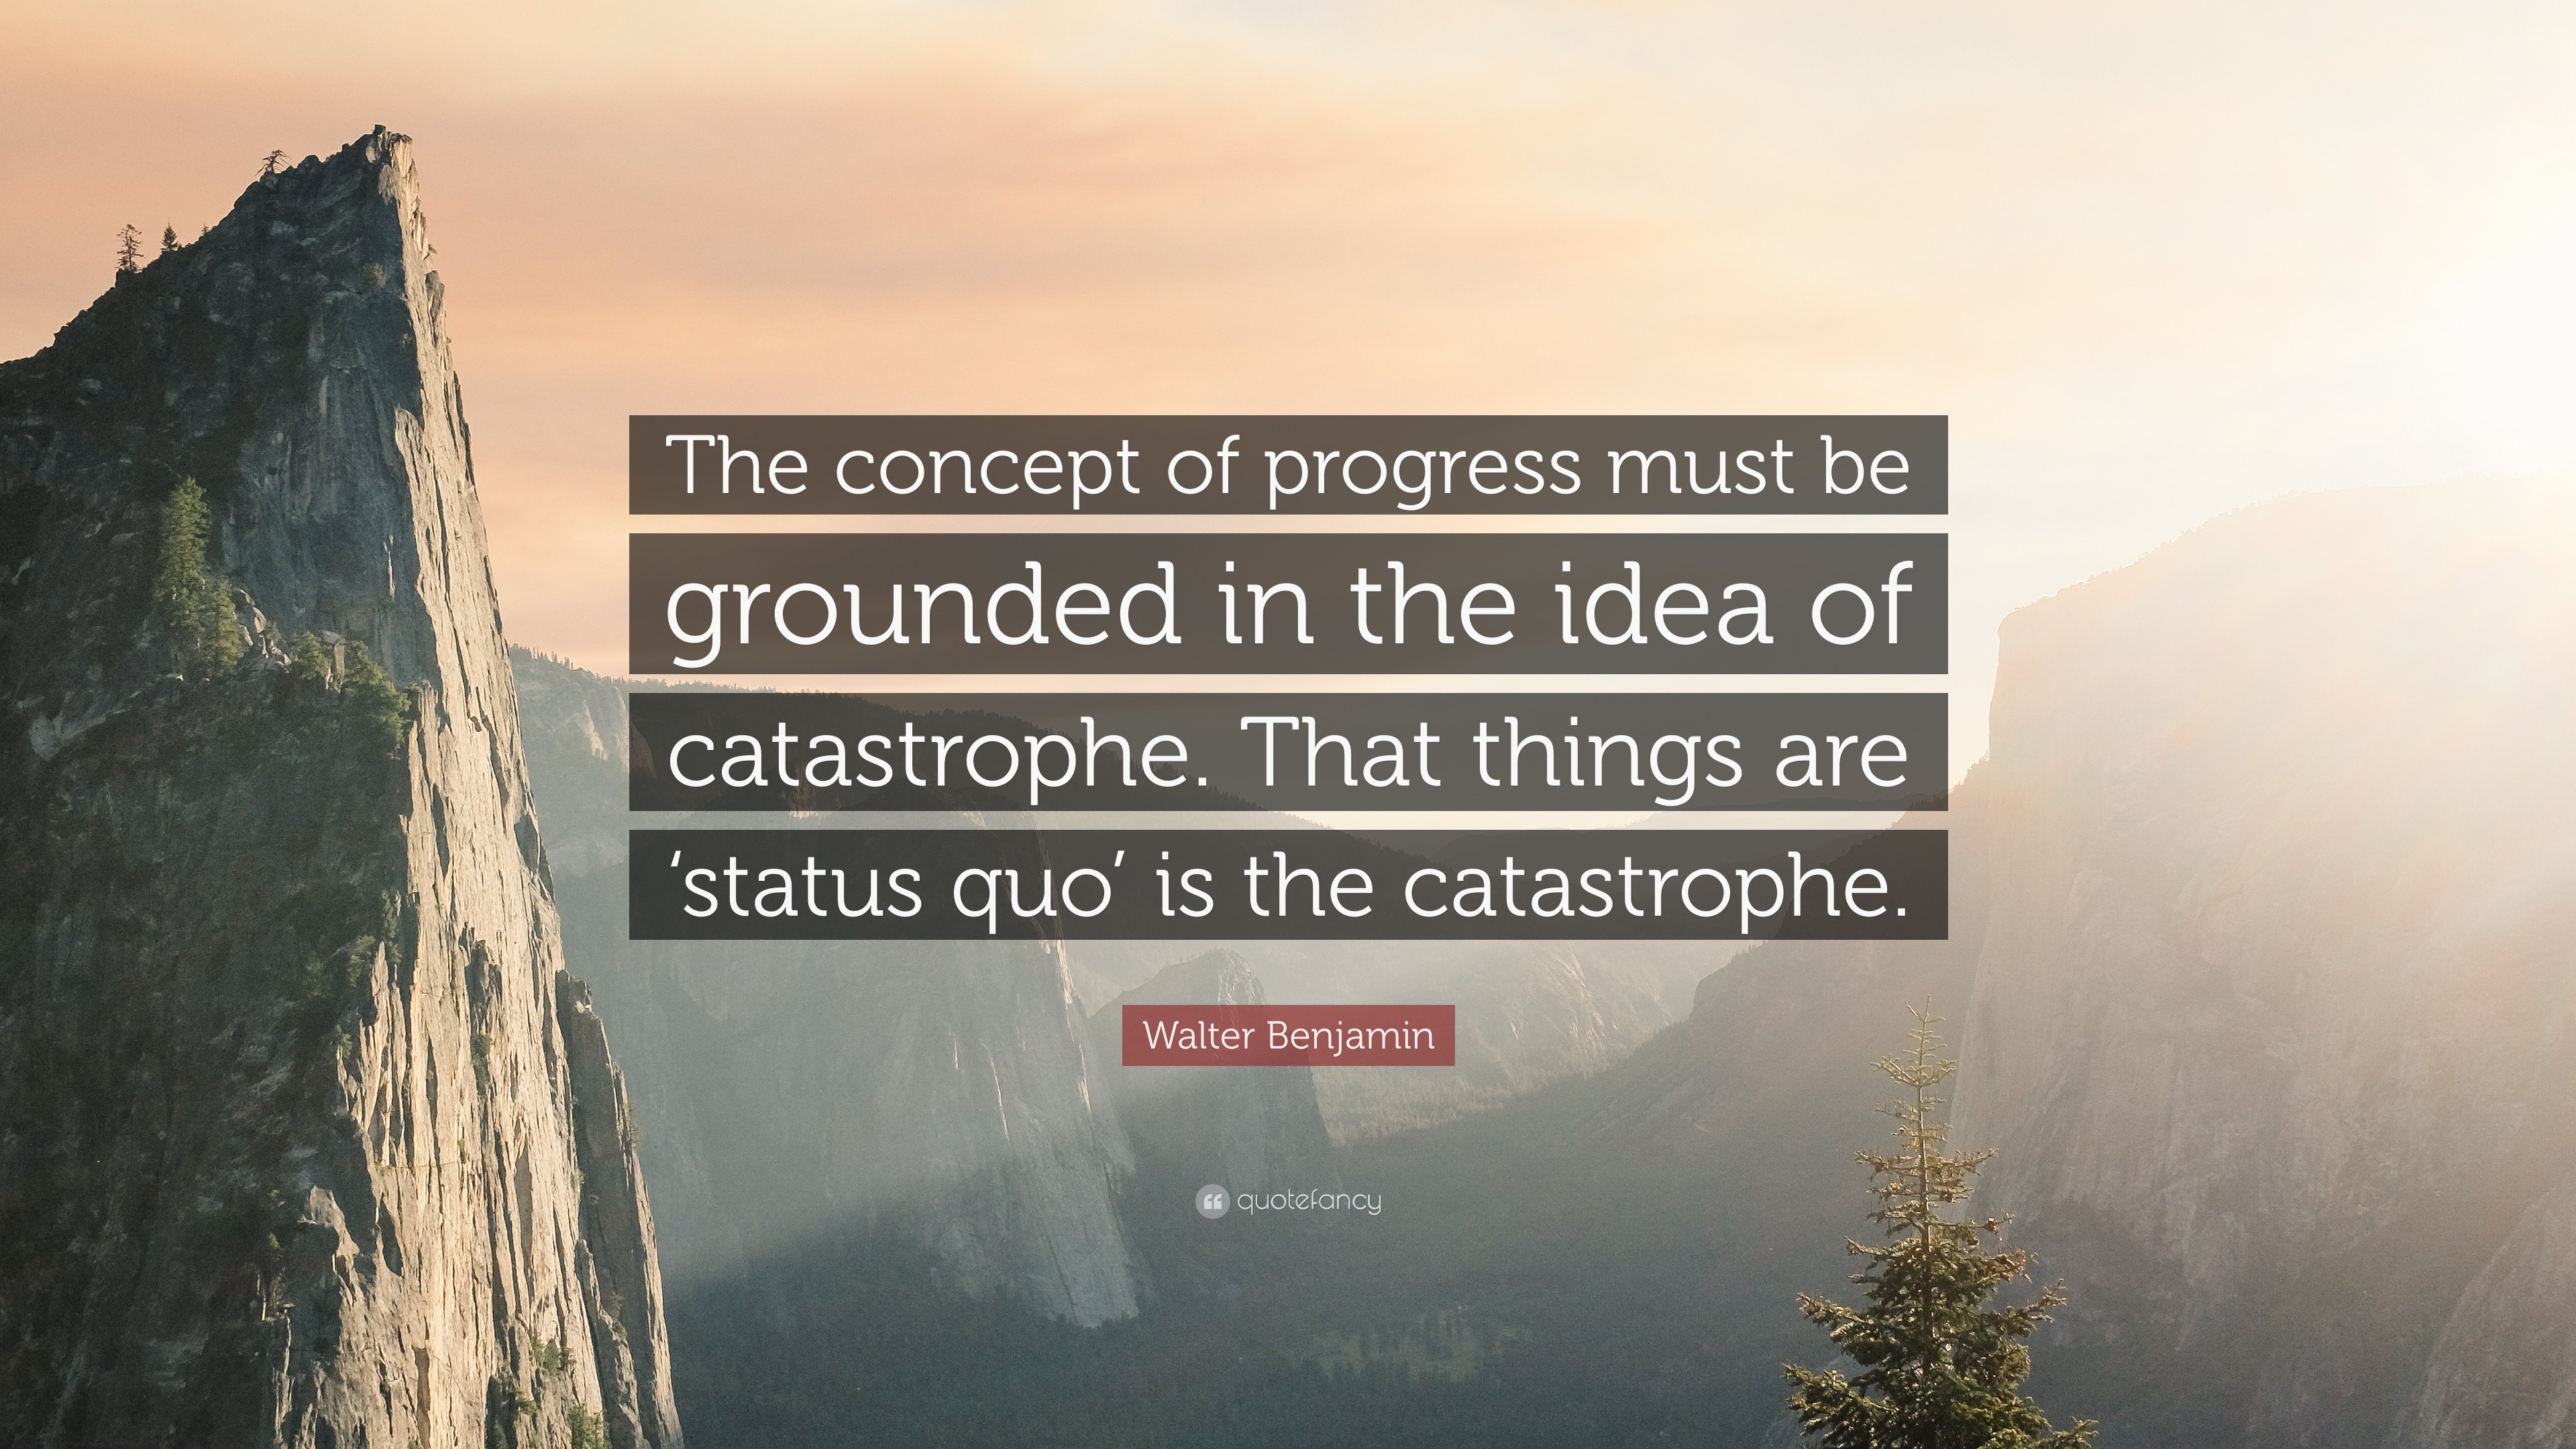 Walter Benjamin Quote: “The concept of progress must be grounded in the  idea of catastrophe. That